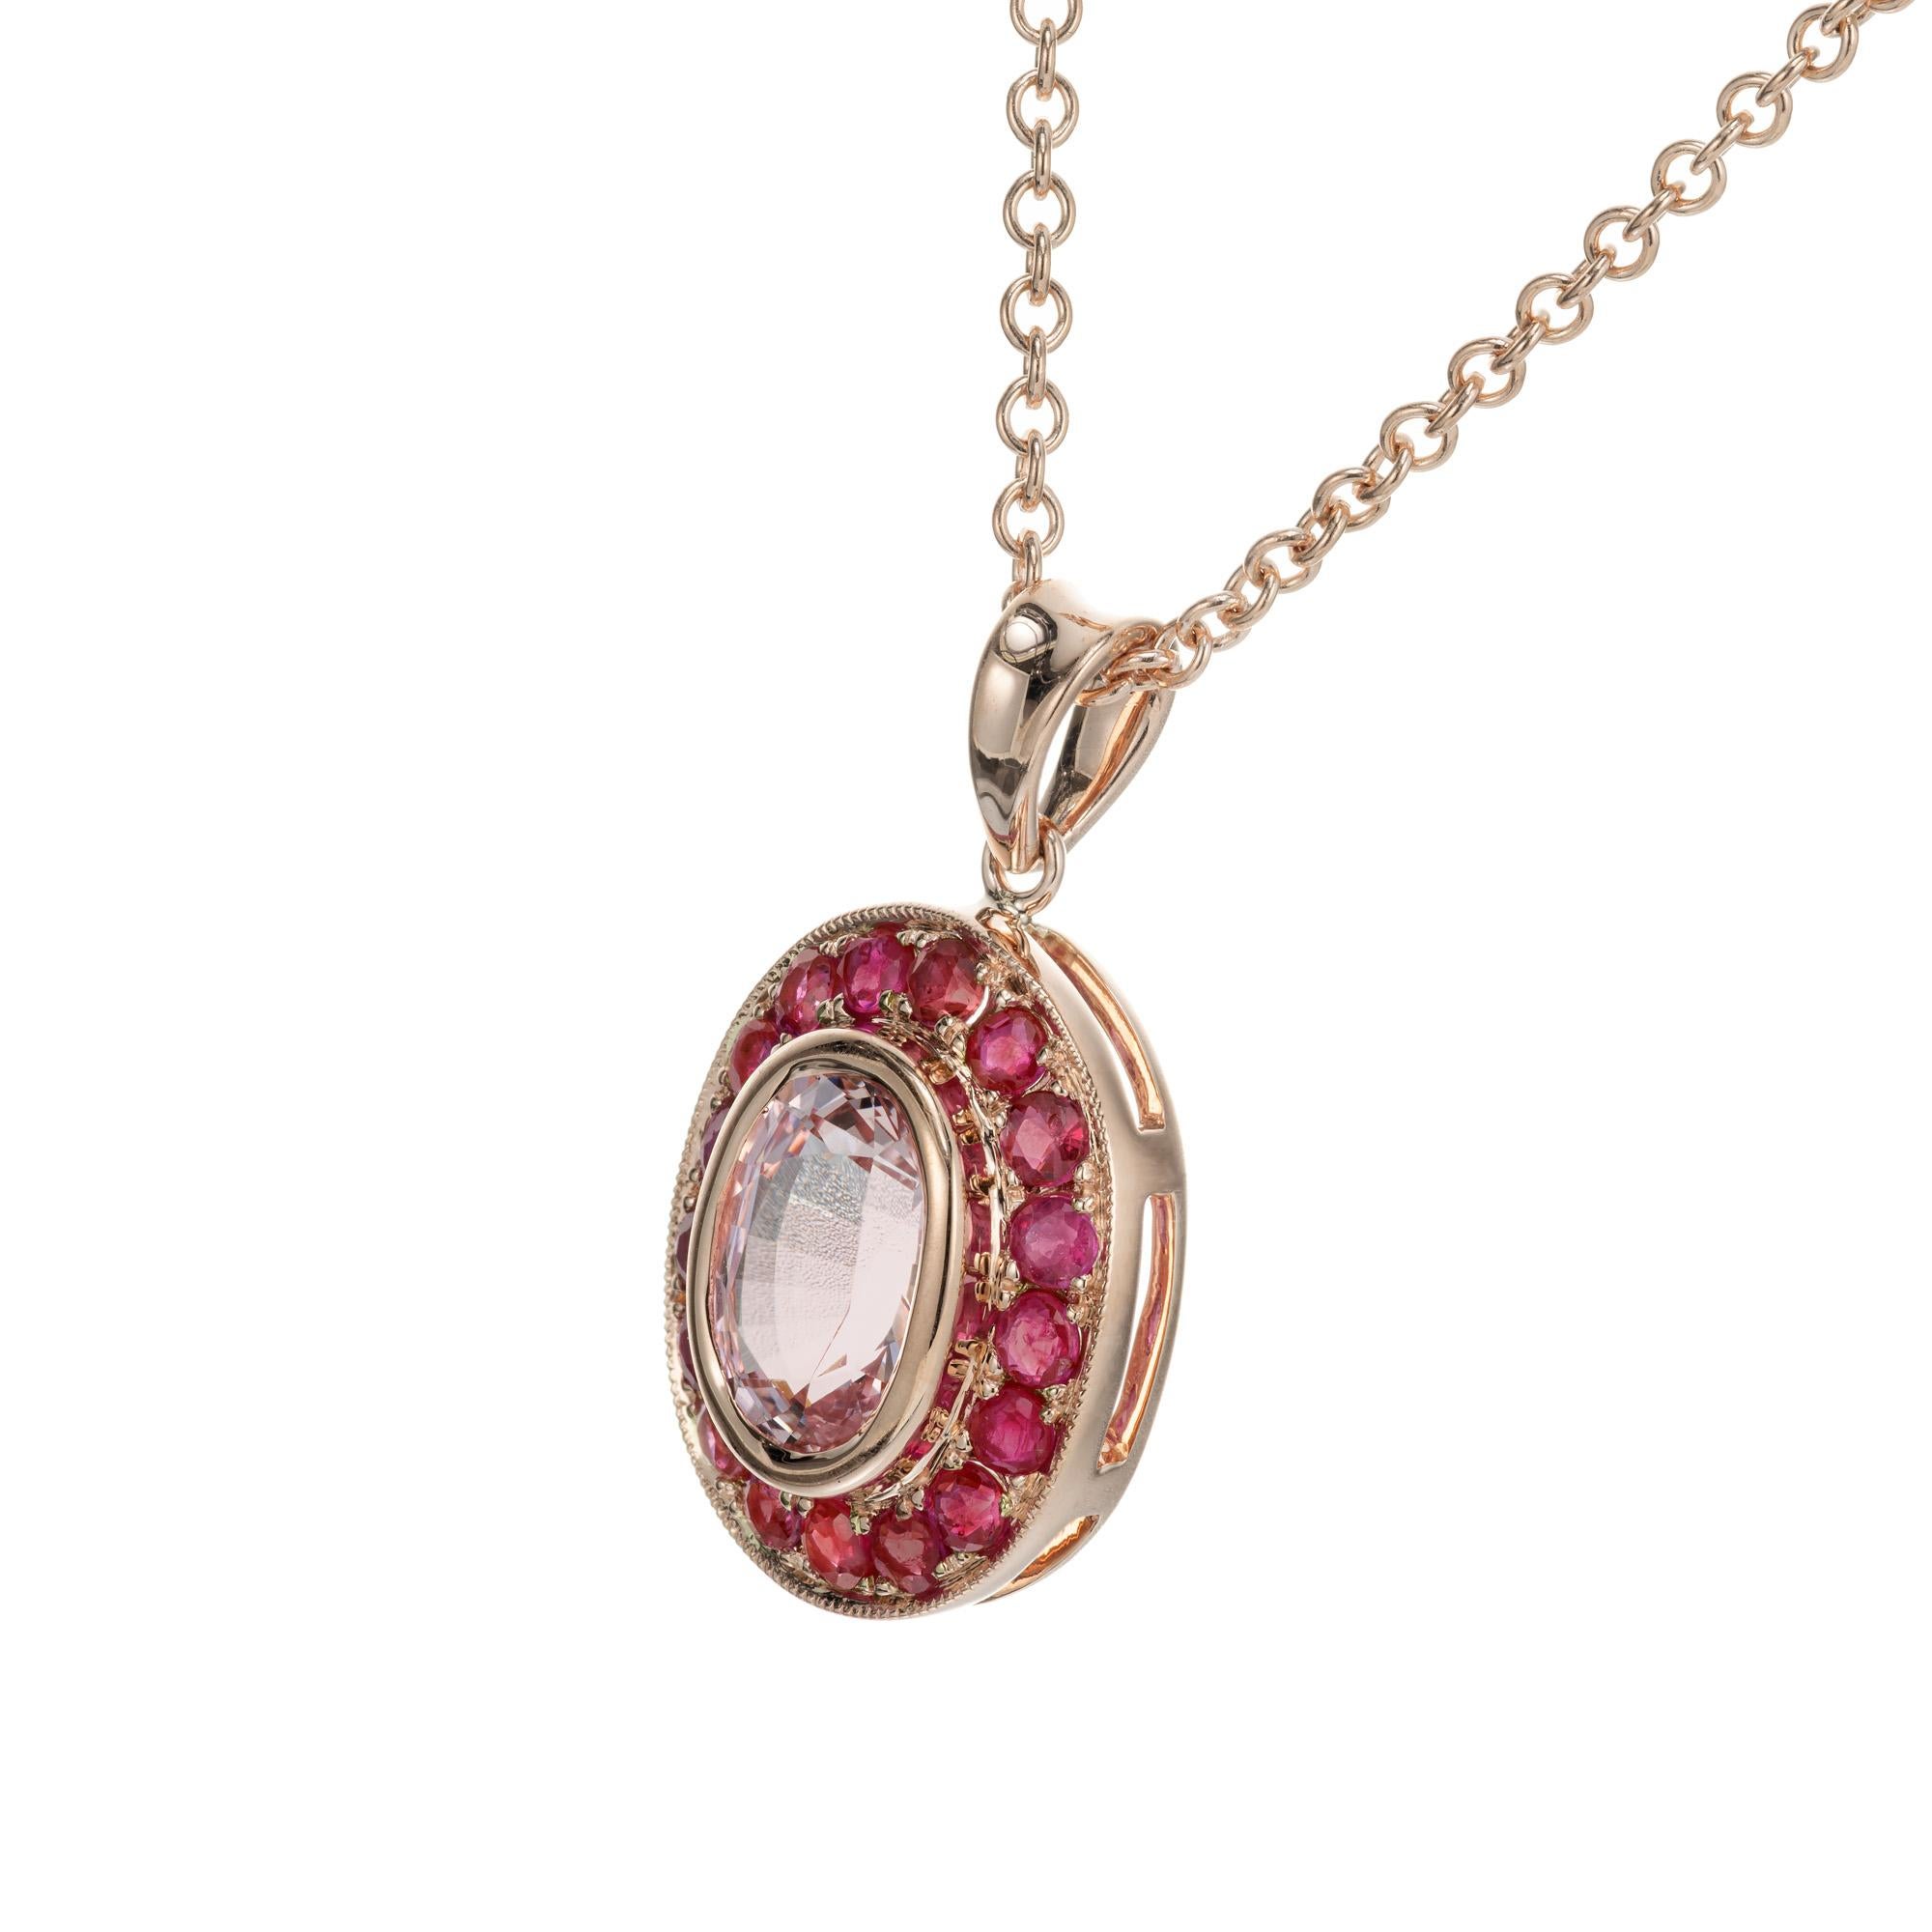 Oval soft light pink sapphire center stone, bezel set with a halo of 17 round bead set rubies.  On Peter's now famous pink gold scale of 1 to 10 with 10 as the deepest pink this scores an 8.  18 inch 14k rose gold chain.

1 oval pink sapphire